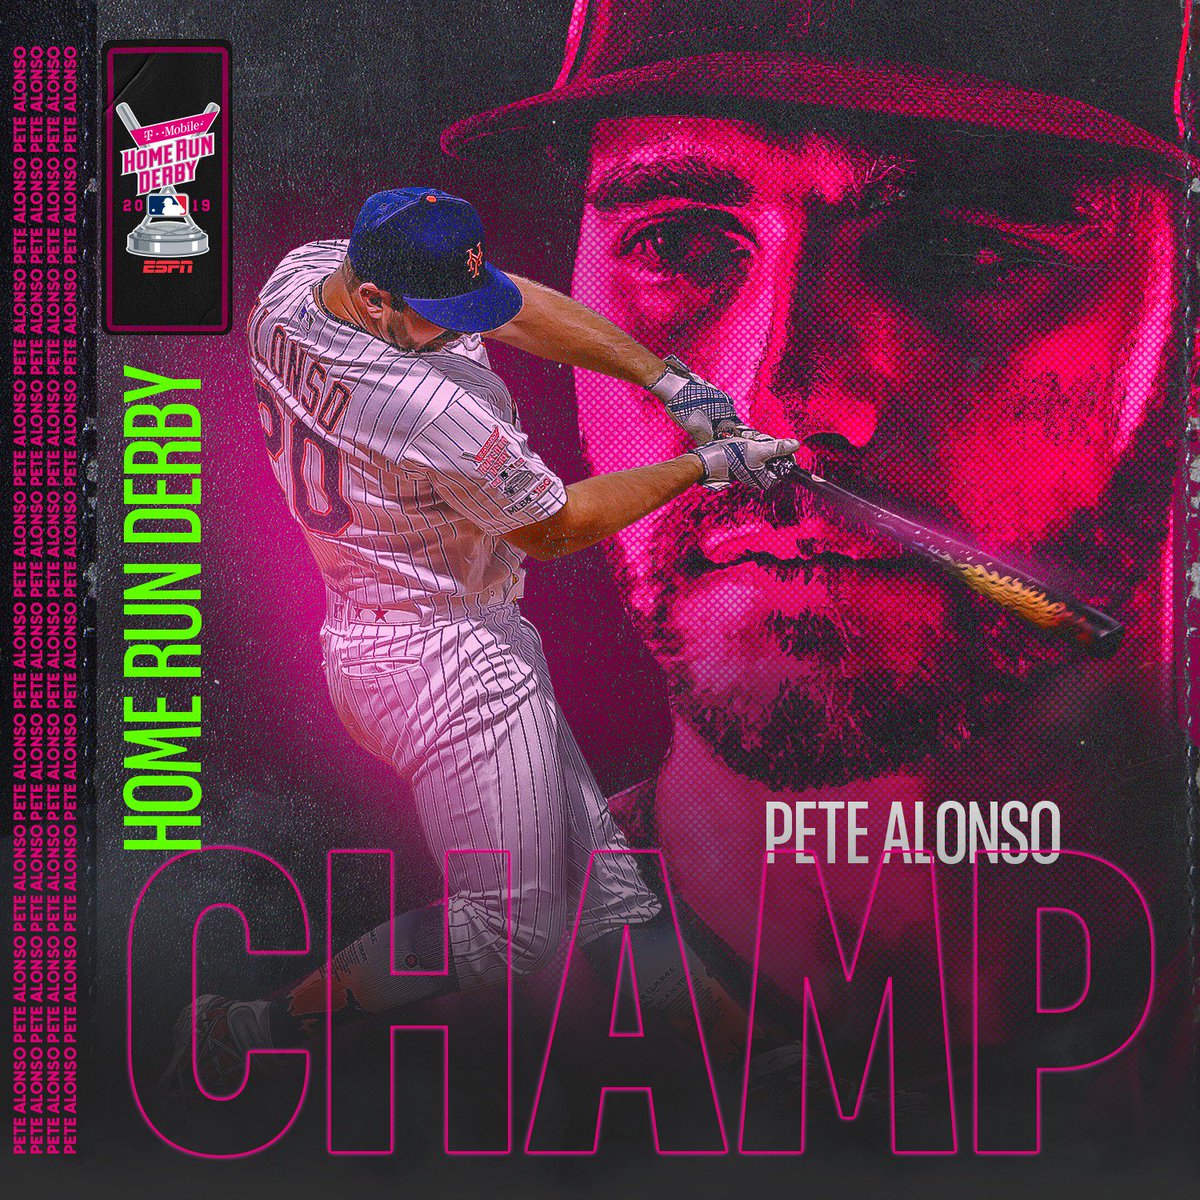 WALK IT OFF! Pete Alonso is your #HRDerby champ.